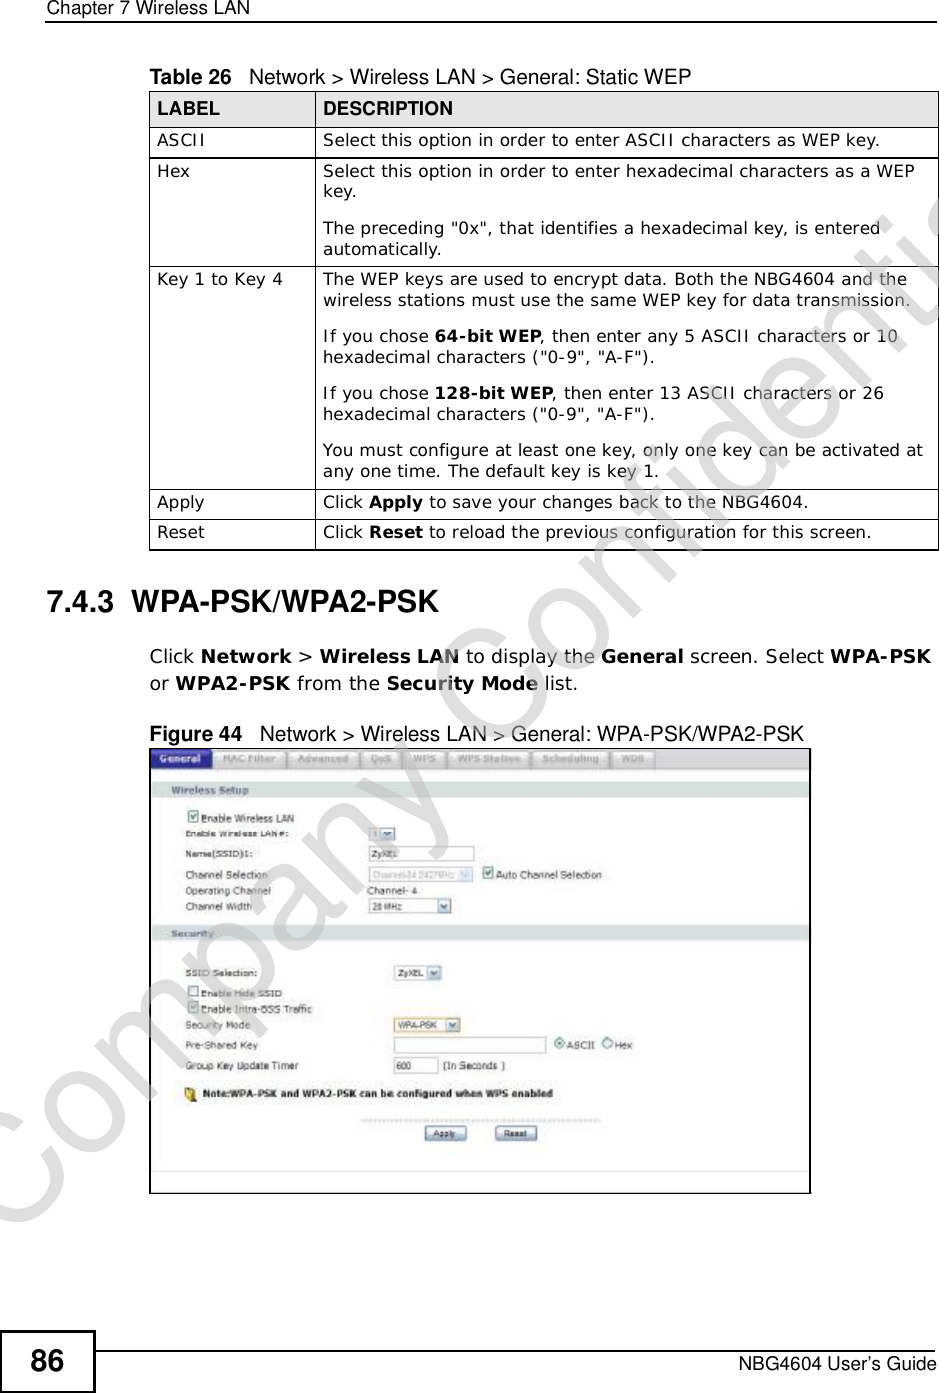 Chapter 7Wireless LANNBG4604 User’s Guide867.4.3  WPA-PSK/WPA2-PSKClick Network &gt; Wireless LAN to display the General screen. Select WPA-PSKor WPA2-PSK from the Security Mode list.Figure 44   Network &gt; Wireless LAN &gt; General: WPA-PSK/WPA2-PSKASCII Select this option in order to enter ASCII characters as WEP key. Hex Select this option in order to enter hexadecimal characters as a WEP key. The preceding &quot;0x&quot;, that identifies a hexadecimal key, is entered automatically.Key 1 to Key 4 The WEP keys are used to encrypt data. Both the NBG4604 and the wireless stations must use the same WEP key for data transmission.If you chose 64-bit WEP, then enter any 5 ASCII characters or 10 hexadecimal characters (&quot;0-9&quot;, &quot;A-F&quot;).If you chose 128-bit WEP, then enter 13 ASCII characters or 26 hexadecimal characters (&quot;0-9&quot;, &quot;A-F&quot;). You must configure at least one key, only one key can be activated at any one time. The default key is key 1.Apply Click Apply to save your changes back to the NBG4604.Reset Click Reset to reload the previous configuration for this screen.Table 26   Network &gt; Wireless LAN &gt; General: Static WEPLABEL DESCRIPTIONCompany Confidential